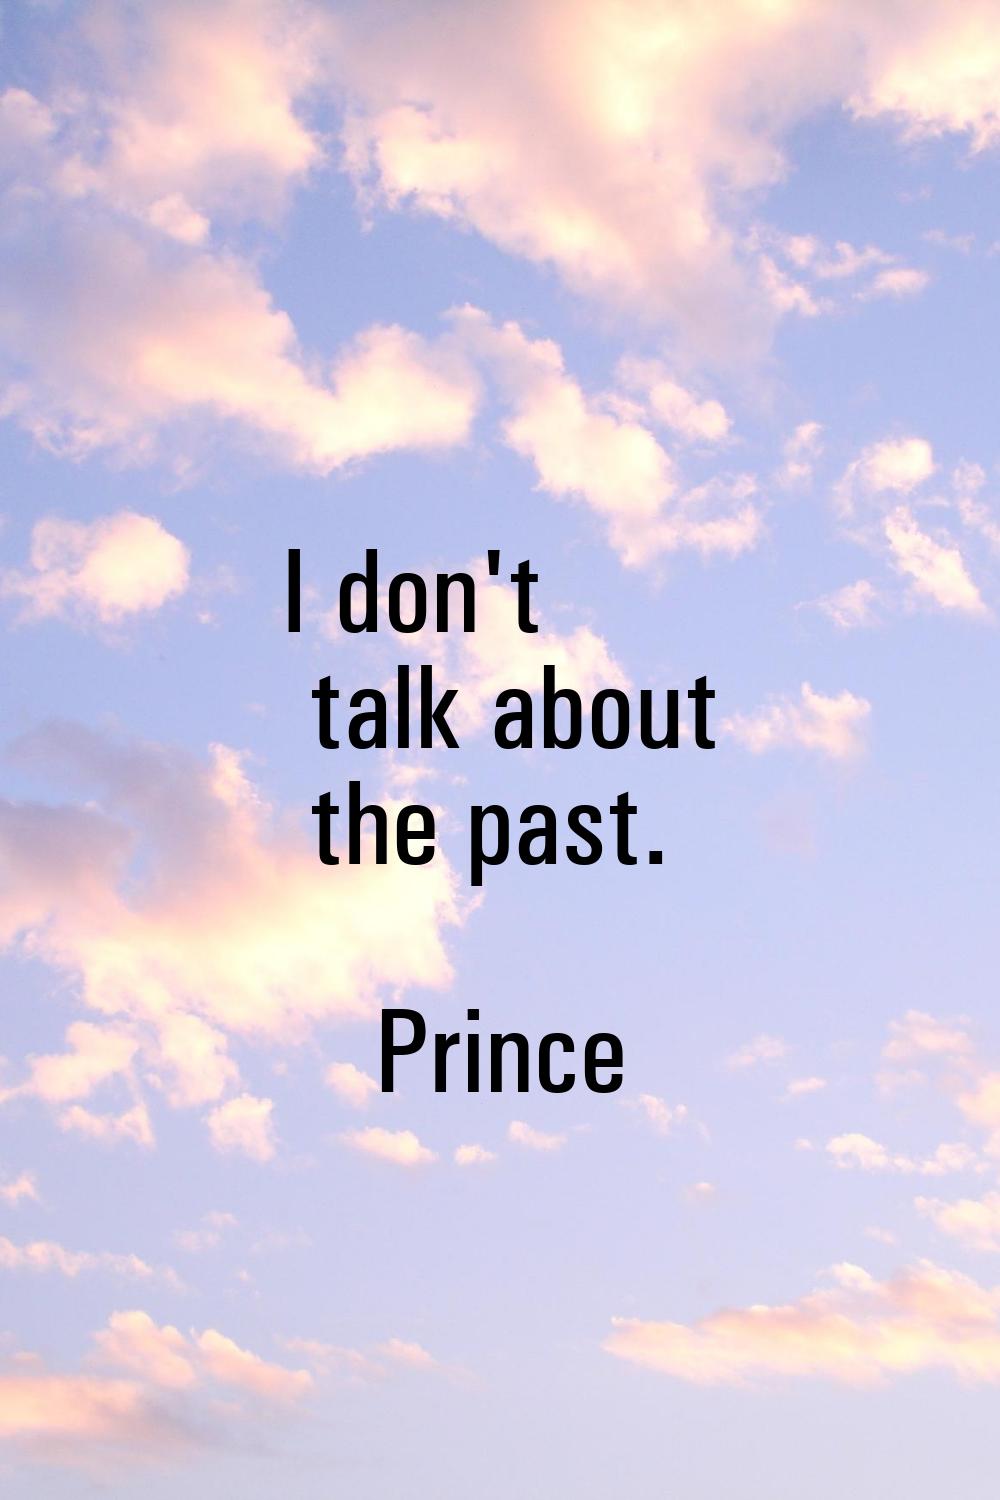 I don't talk about the past.